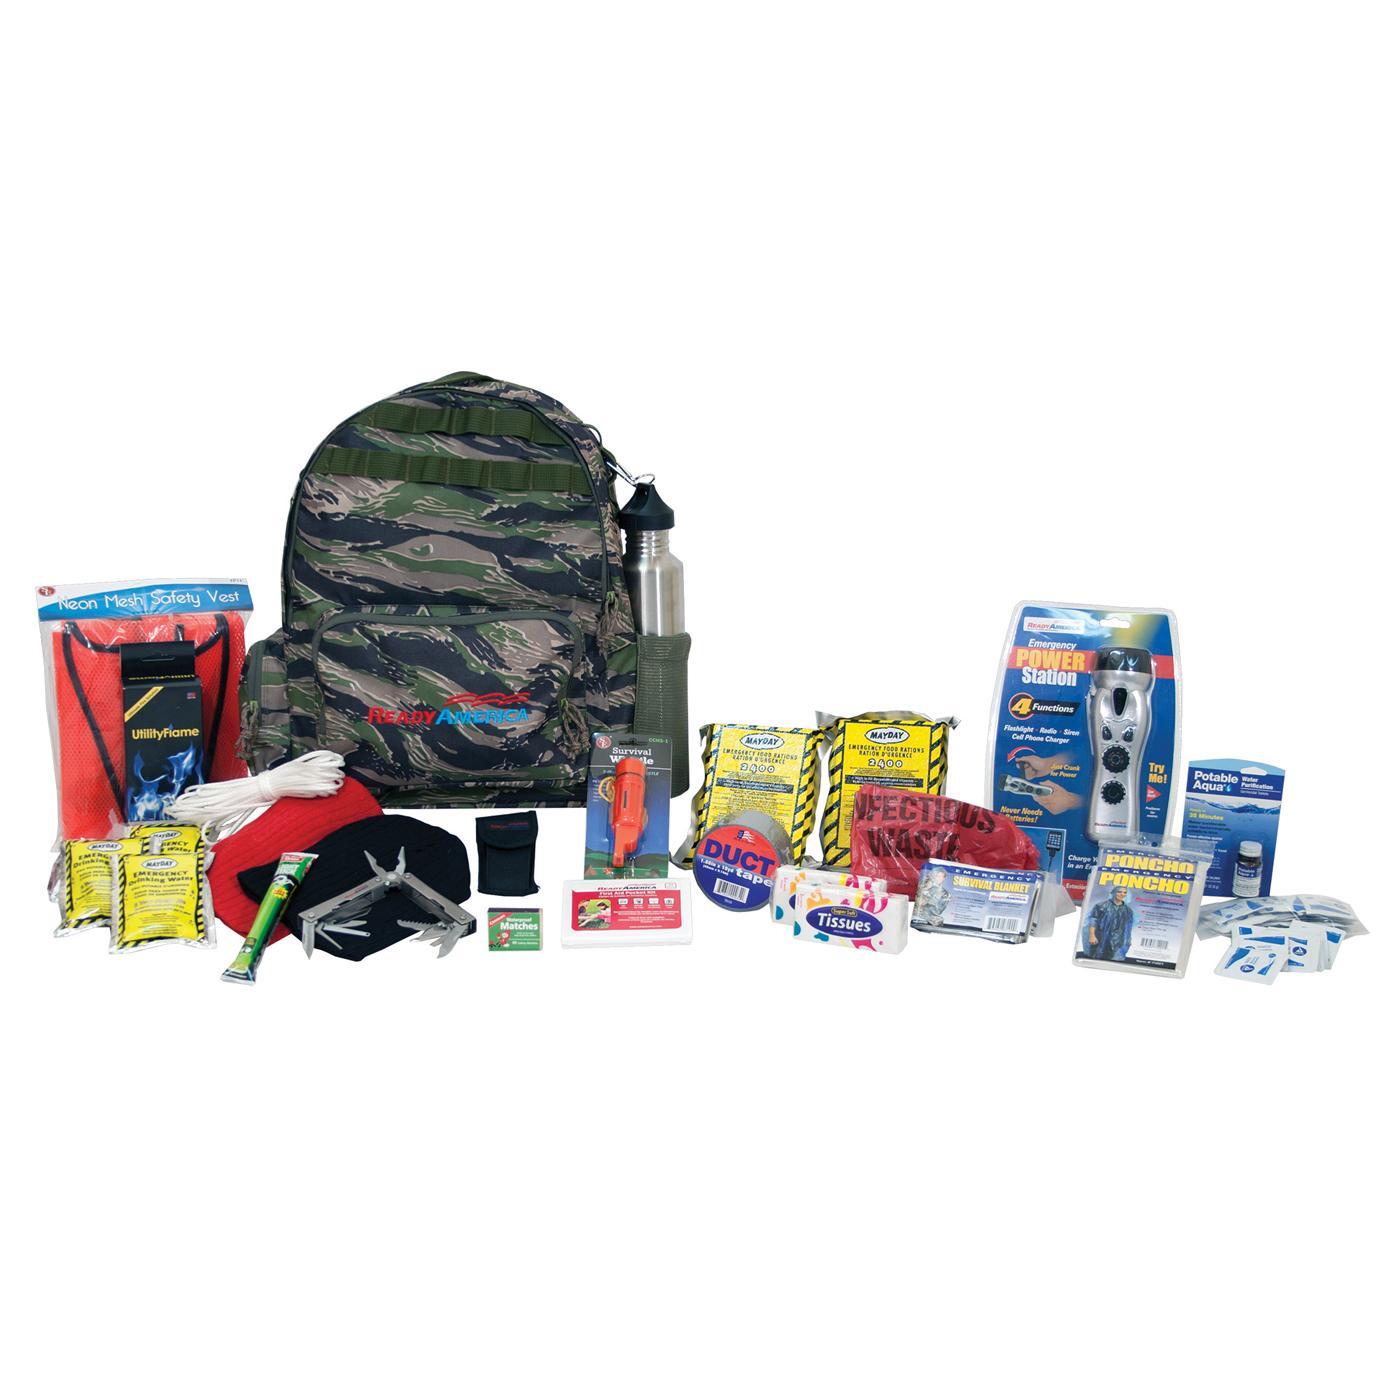 The Role of a Survival Kit in Wilderness Safety